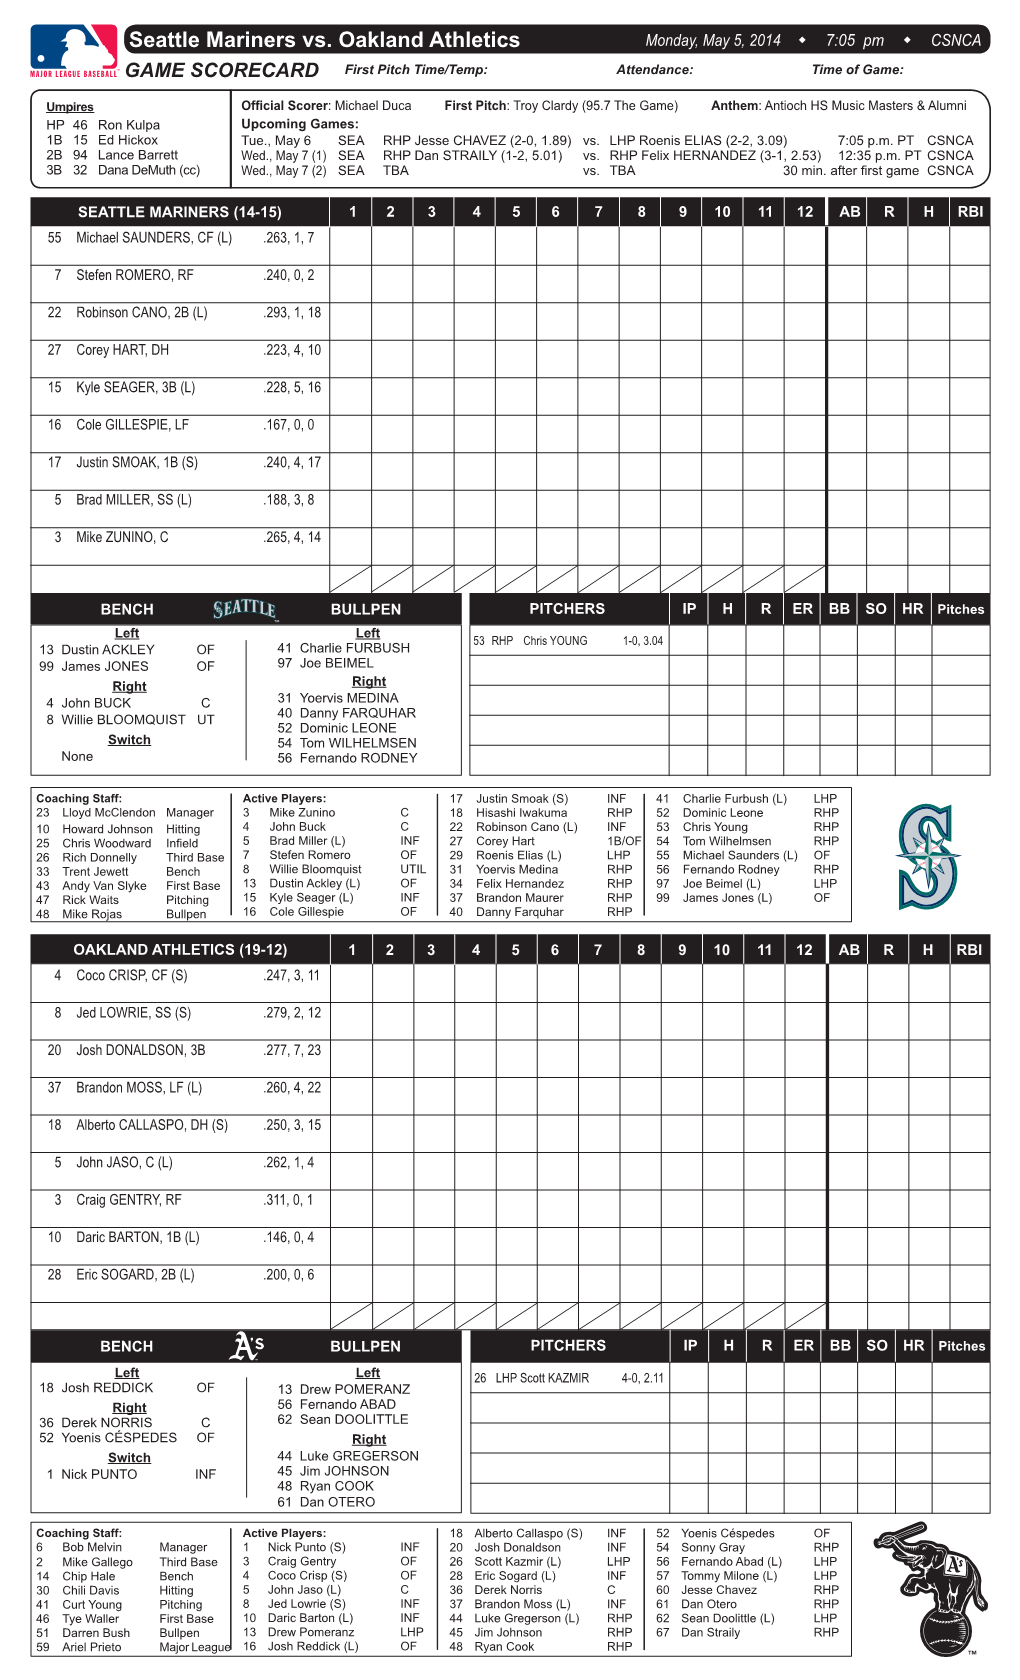 Seattle Mariners Vs. Oakland Athletics Monday, May 5, 2014 W 7:05 Pm W CSNCA GAME SCORECARD First Pitch Time/Temp: Attendance: Time of Game